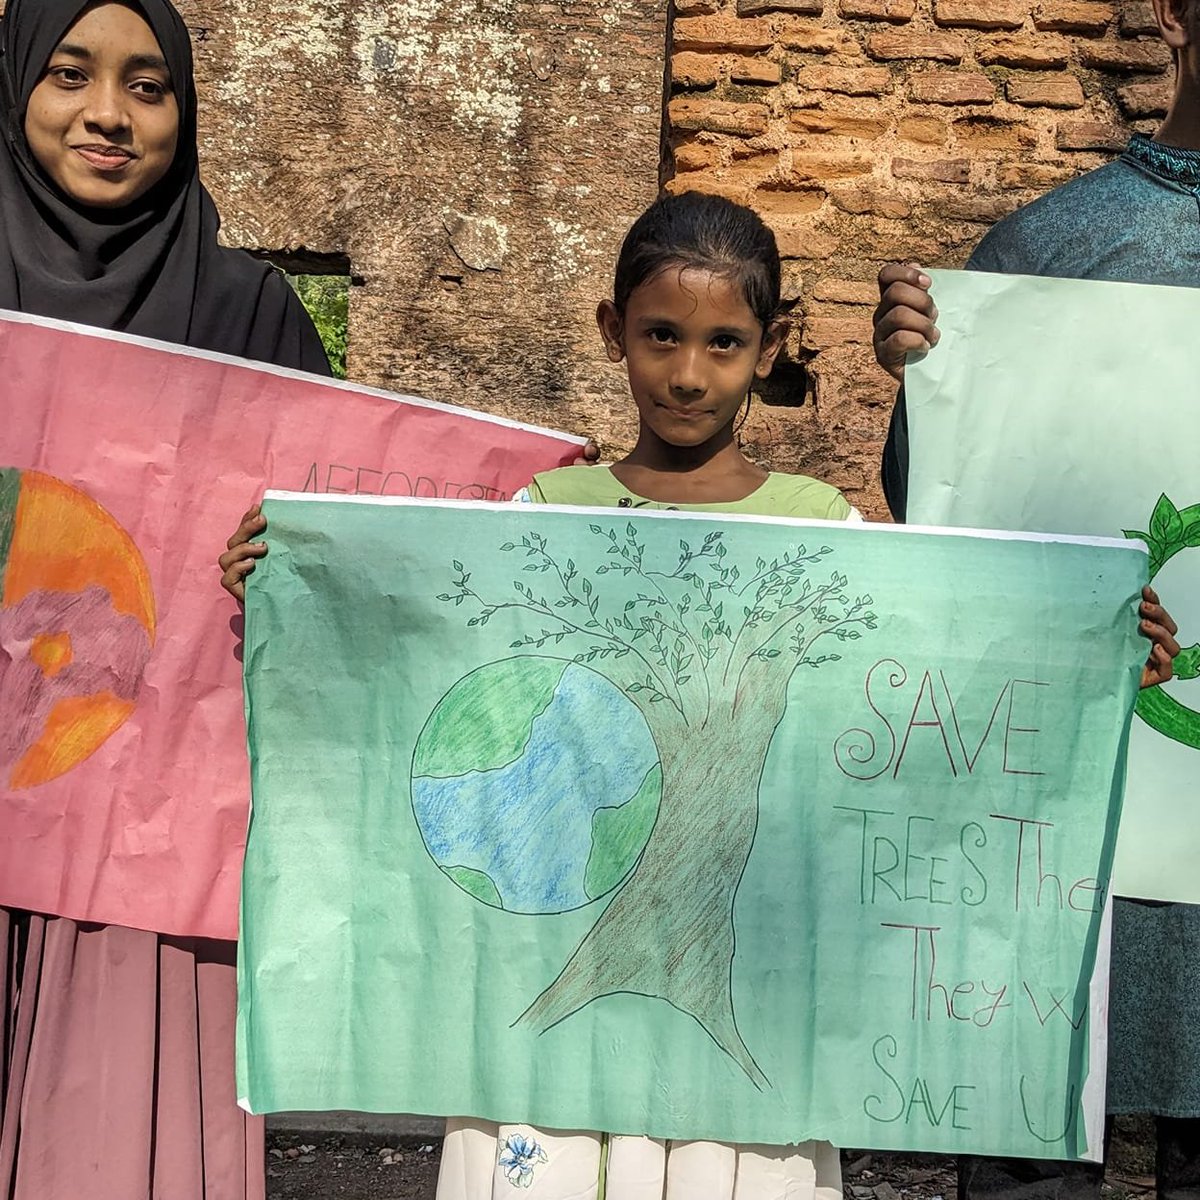 We are unstoppable, another world is possible!
Climate Justice for everyone, everywhere.🇧🇩✊

#ClimateJusticeNow 
#FridaysForFuture
@GretaThunberg